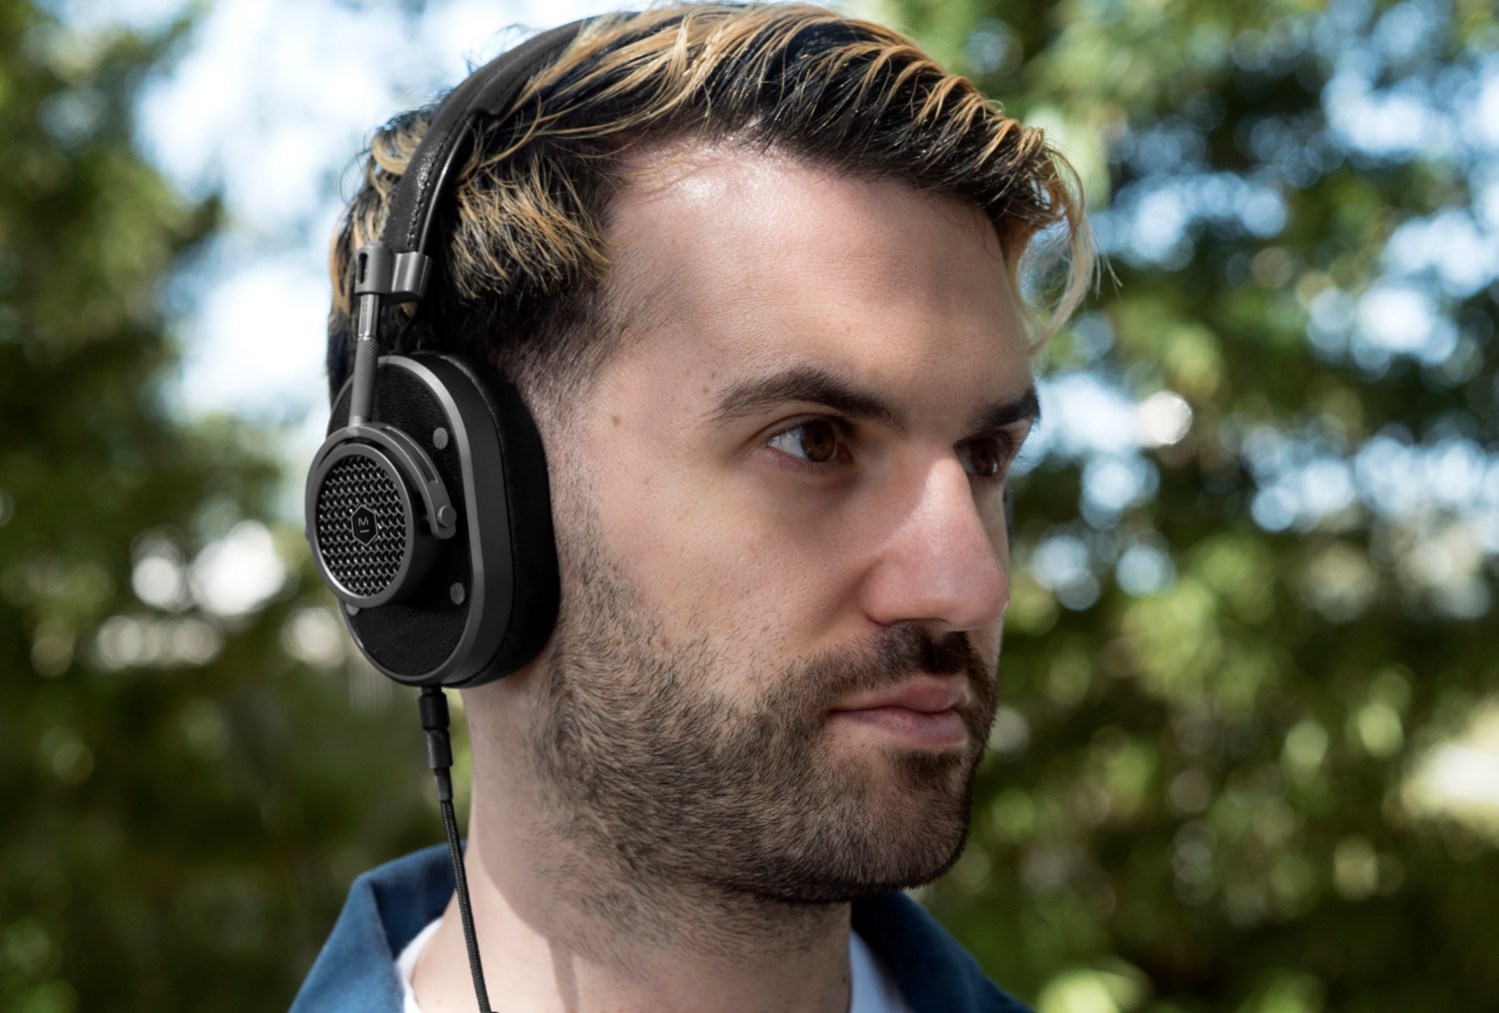 Lifestyle image of DJ A-Trak wearing Master and Dynamic headphones